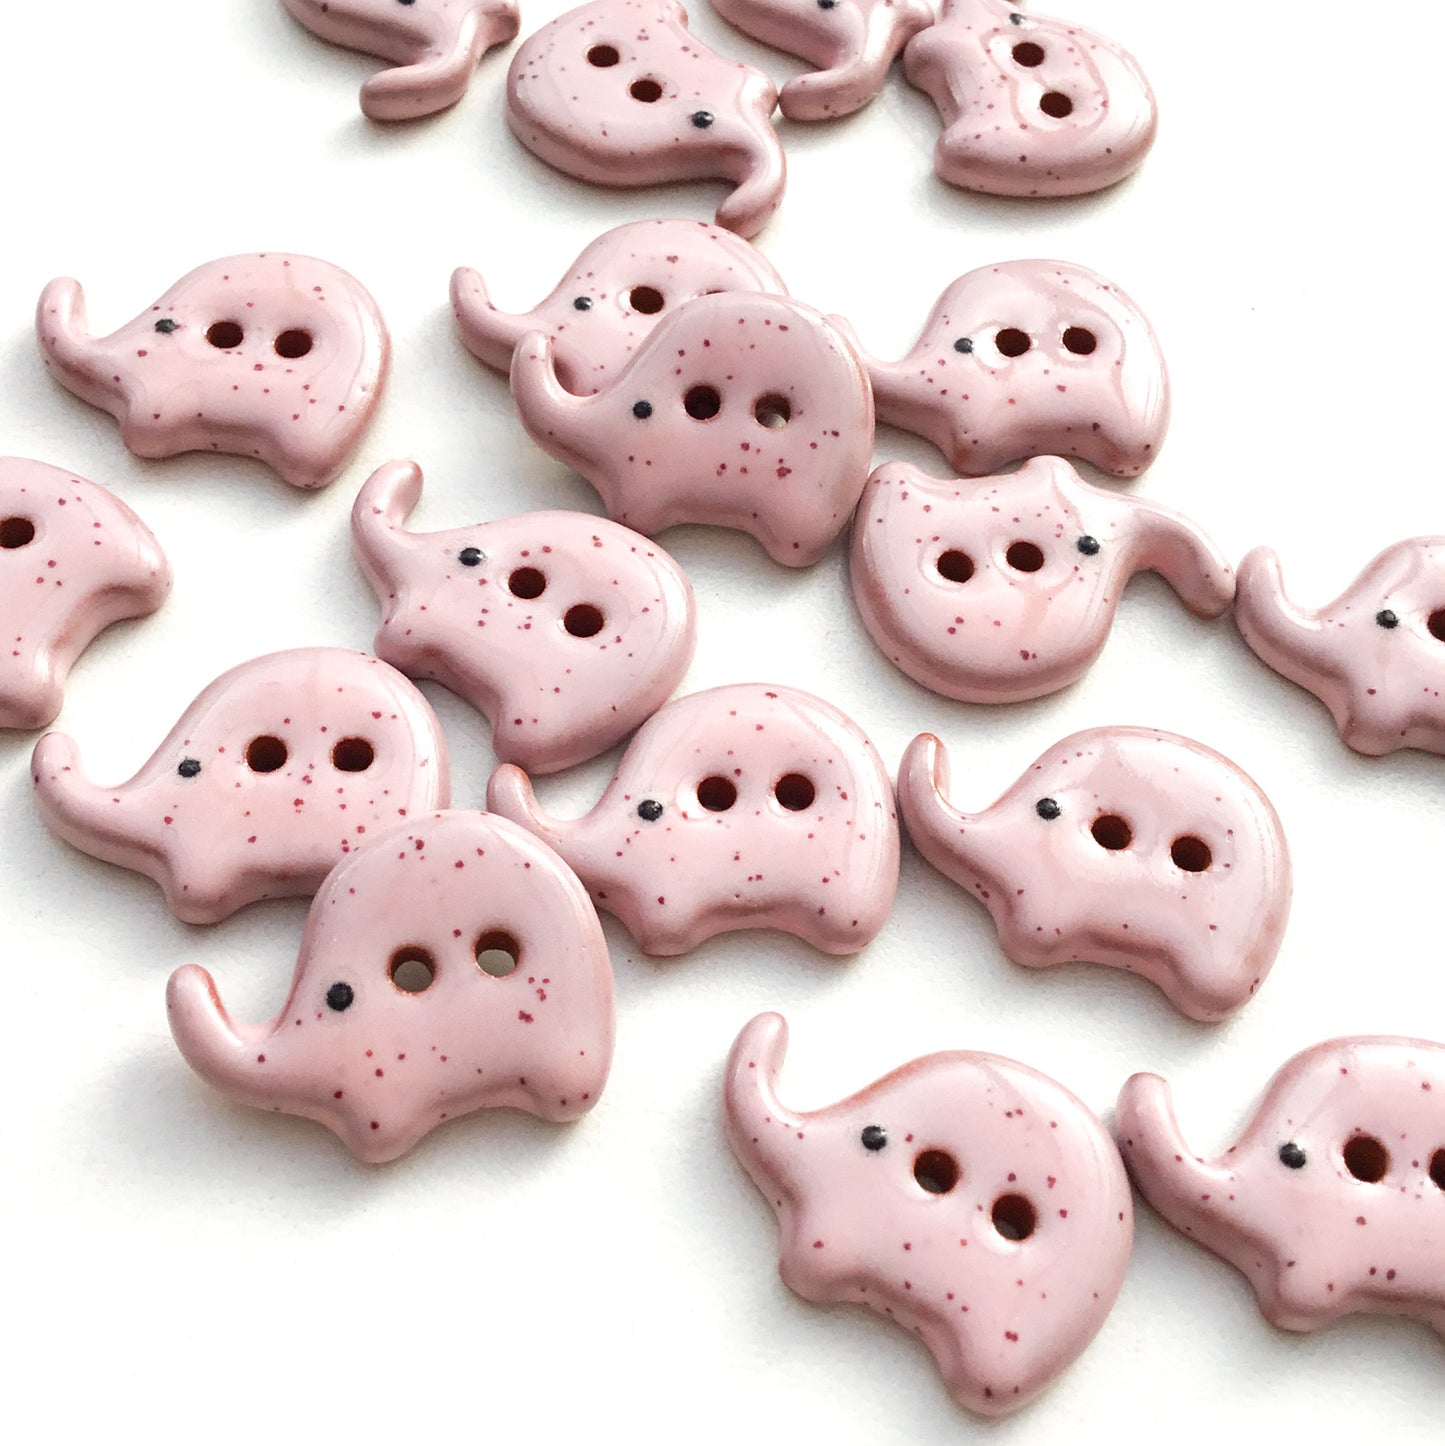 Speckled Pink Ceramic Elephant Buttons - 5/8"